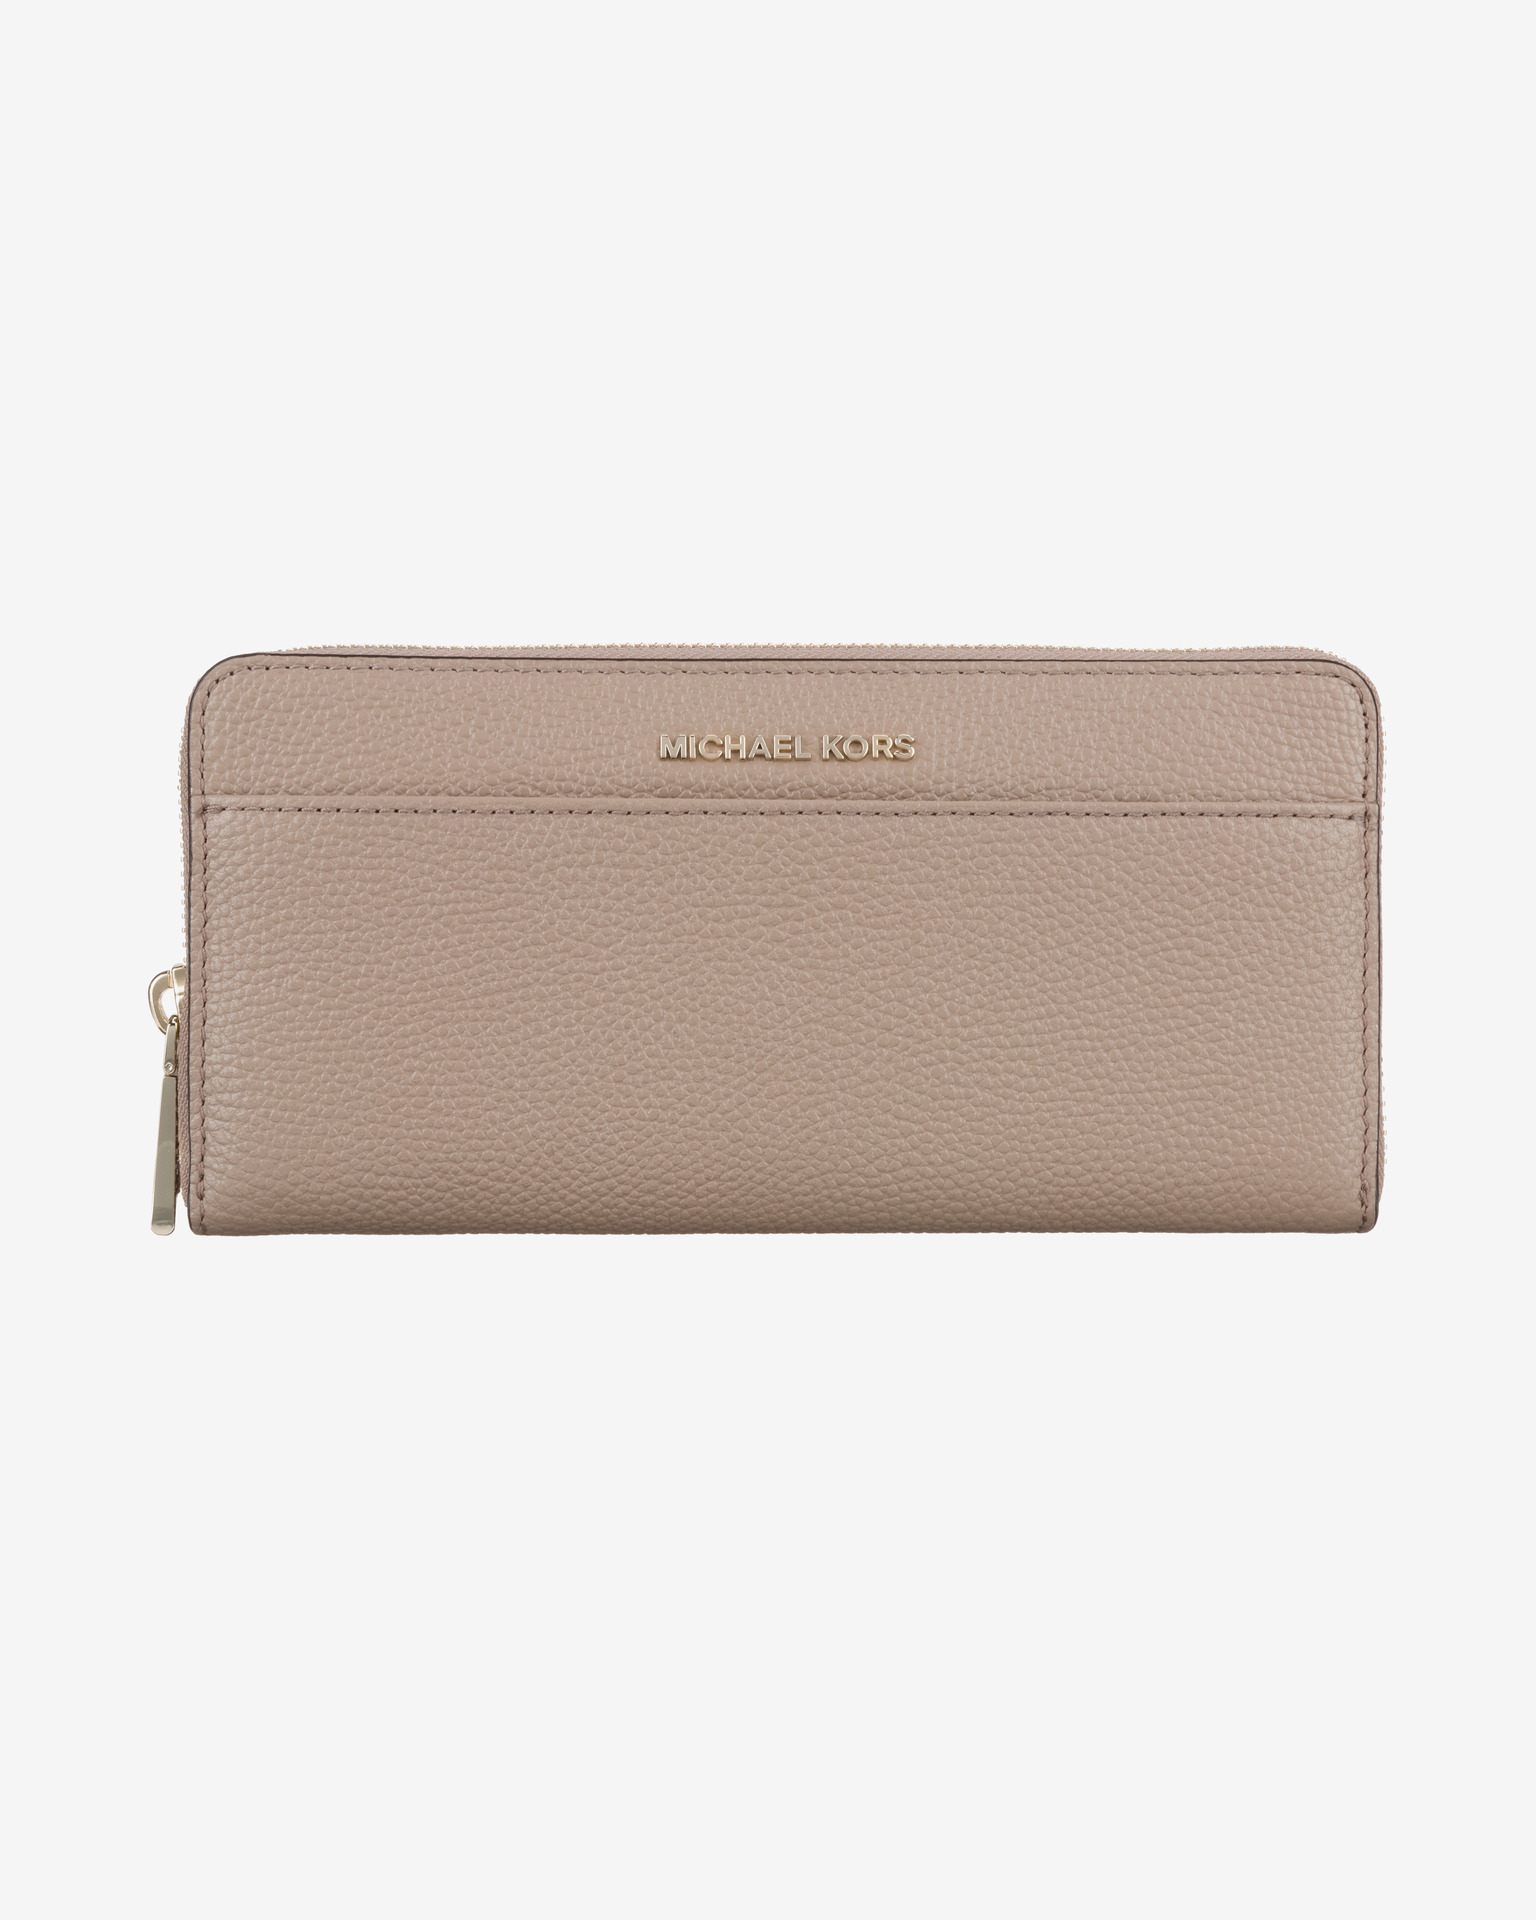 Stylish Michael Kors Coin Pouch Wallet with Key Ring